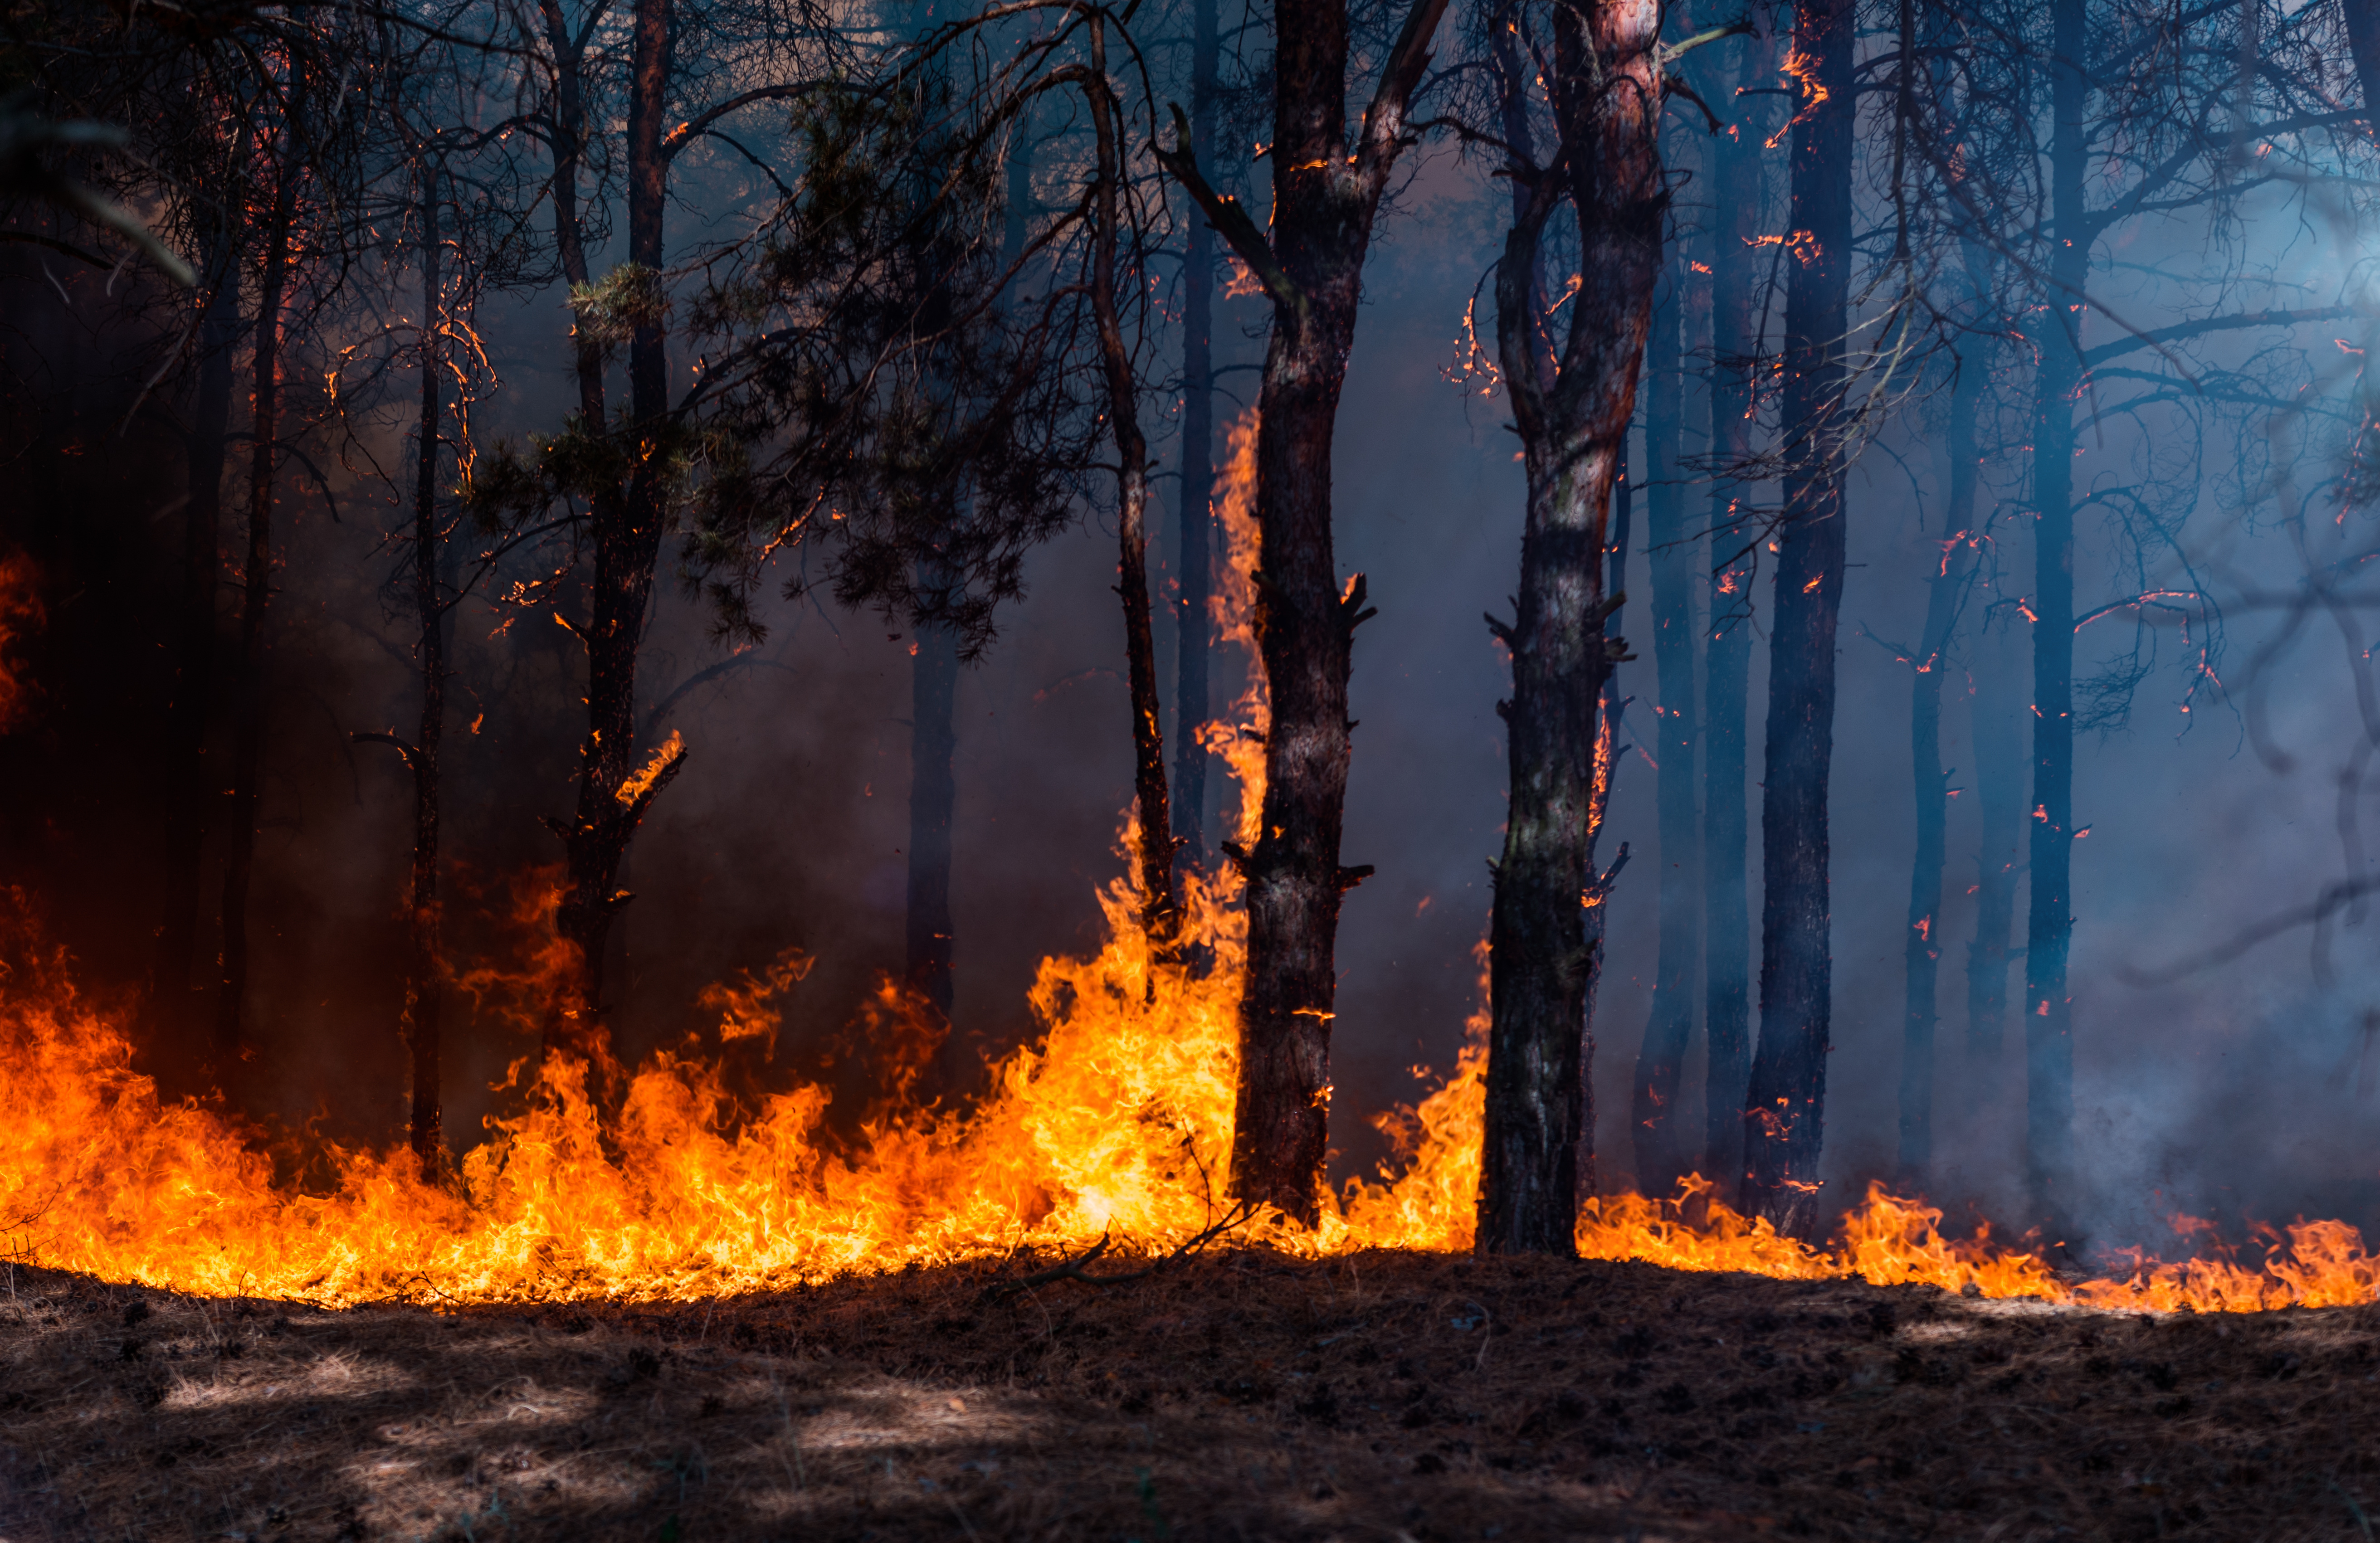 New tool to provide a harmonised fire risk assessment across the Pan-European region